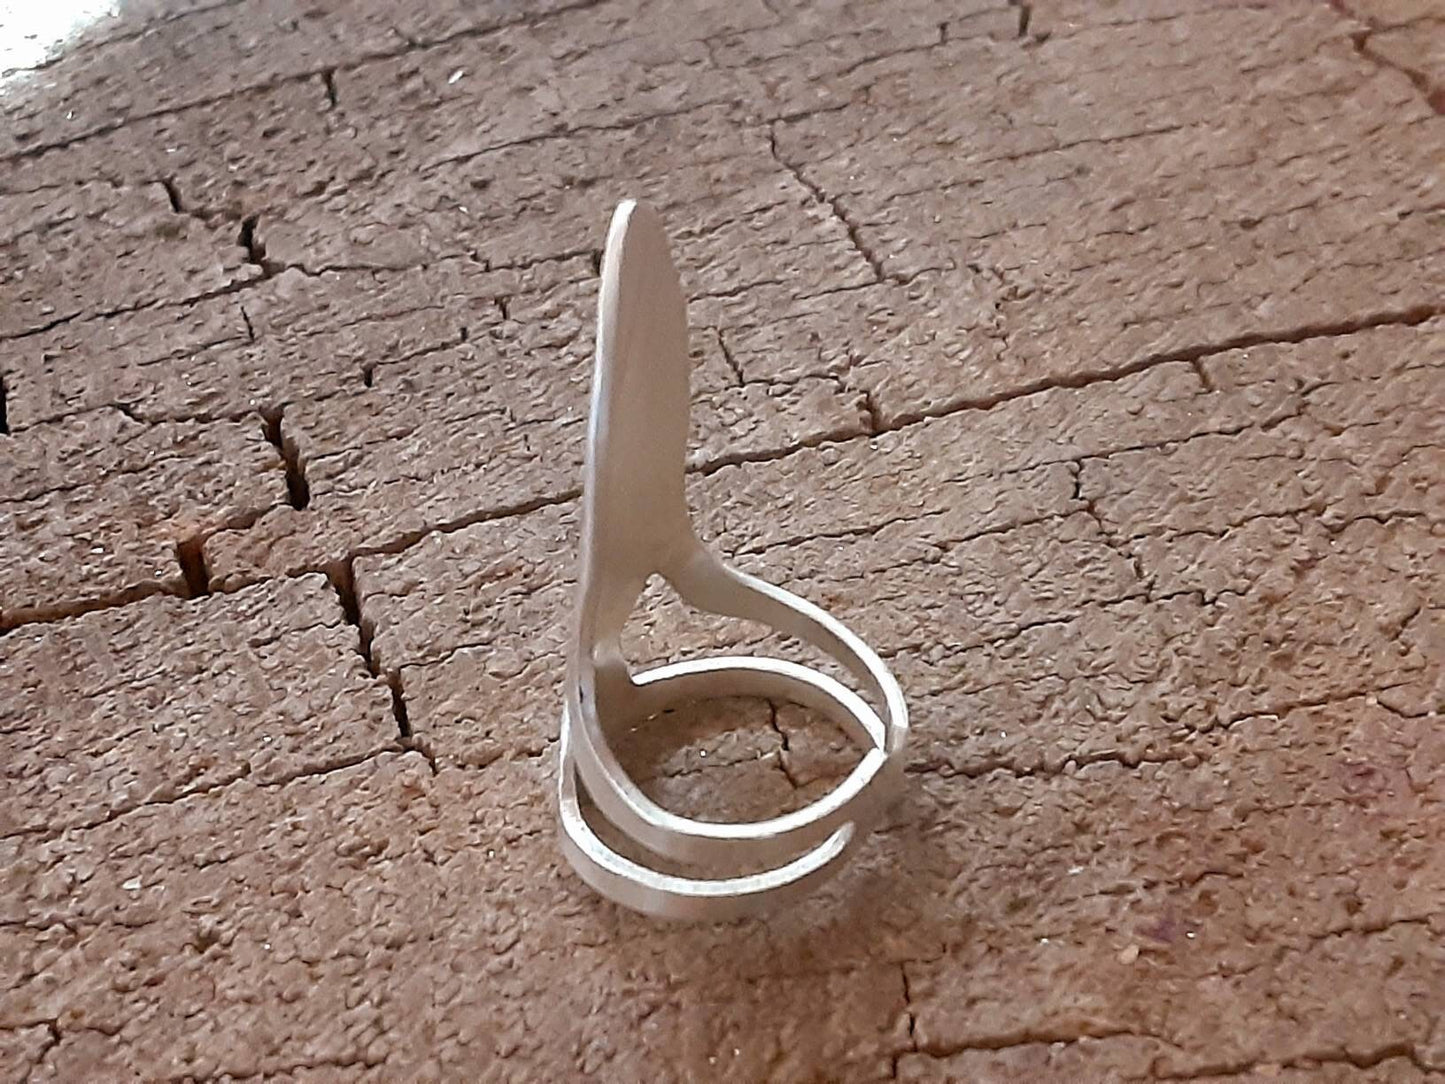 Finger pick in sterling silver with stamped design